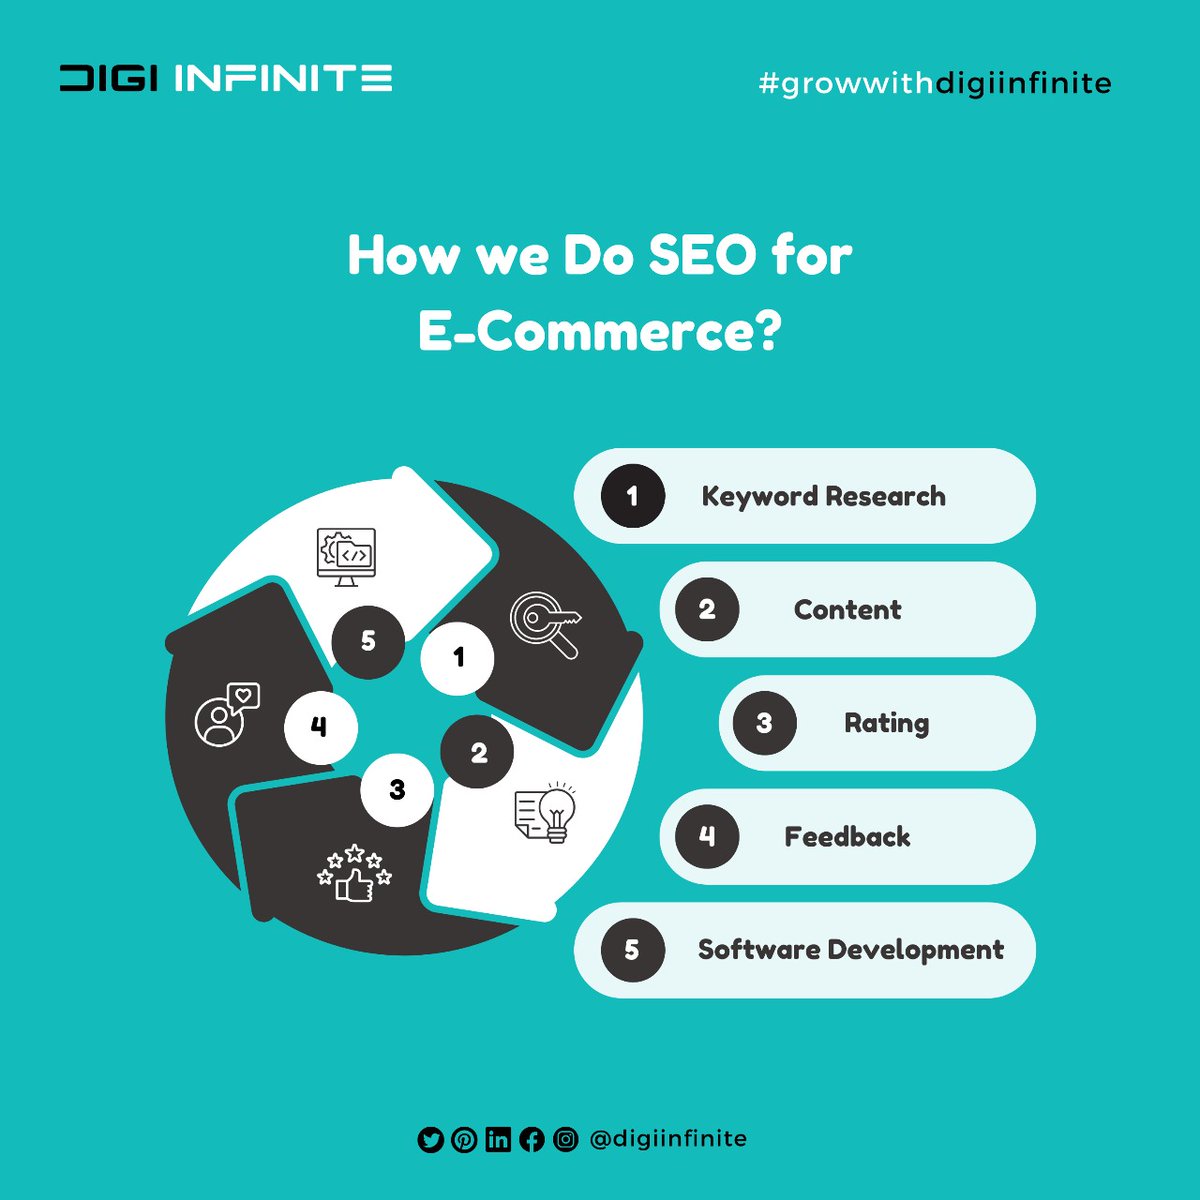 Unlock your e-commerce potential with our top-tier SEO services. Dominate search rankings, drive targeted traffic, and boost sales like never before. Experience the best in digital marketing excellence! 

#digiinfinite #growuptoinfinite #DigitalMarketing #SEOExpert #Ecommerce